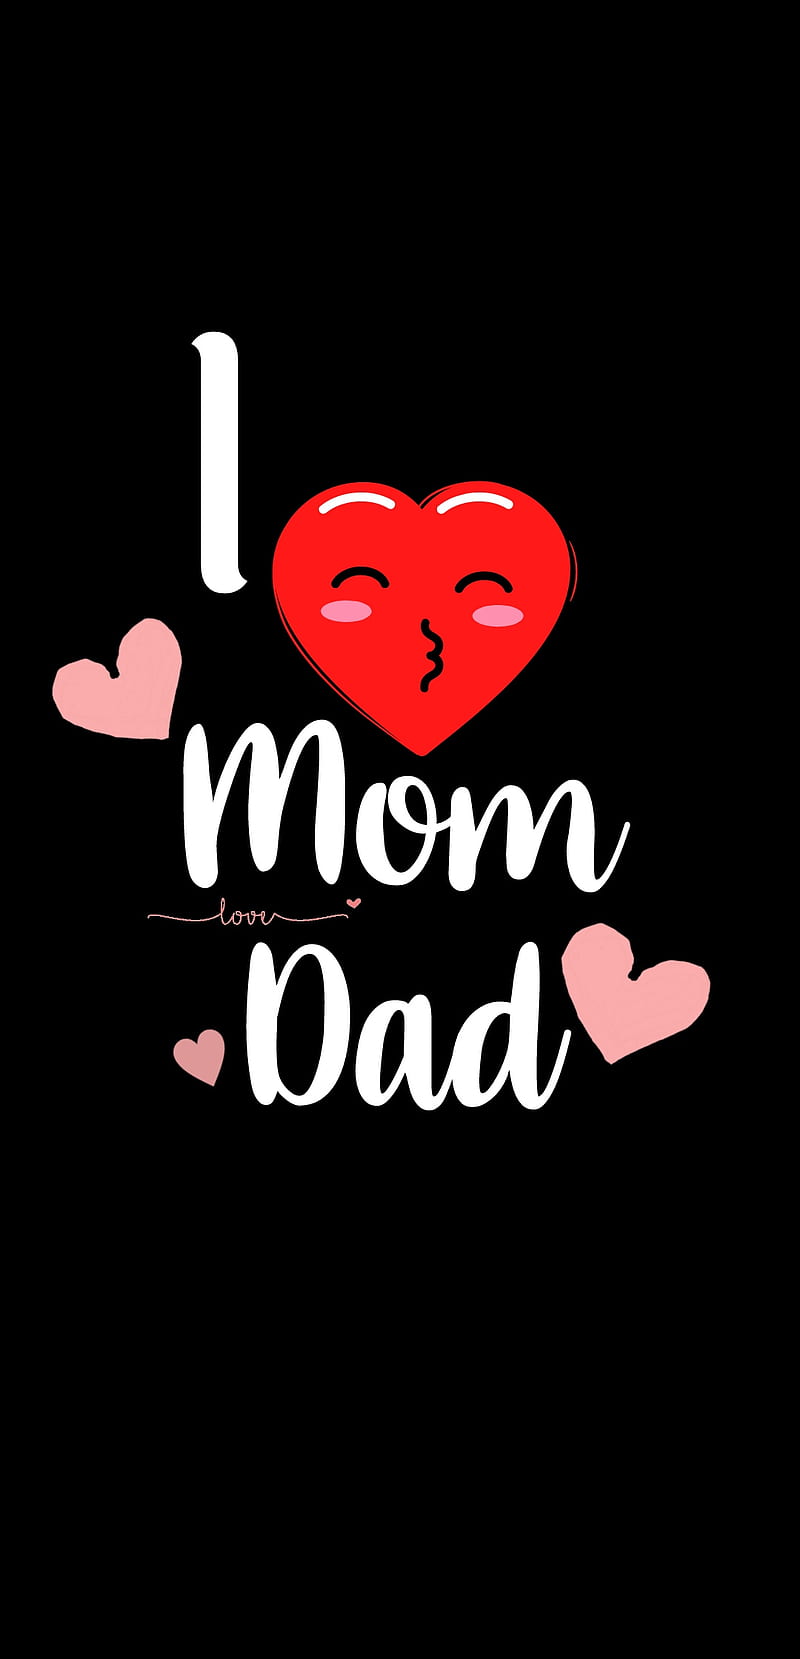 Pin on mom and dad hd wallpaper download